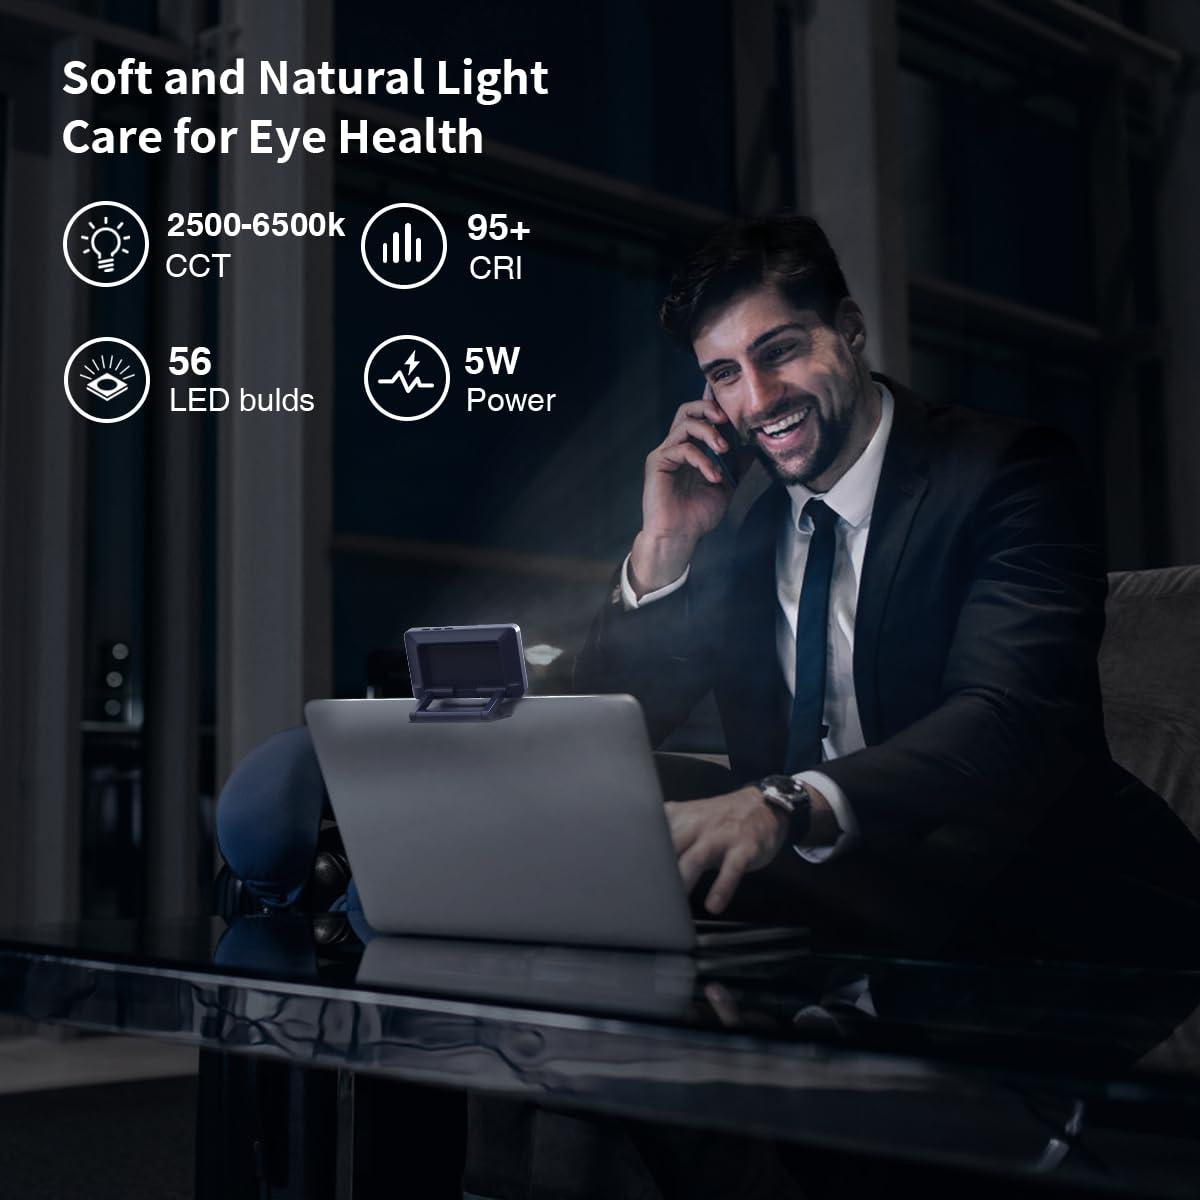 LitONES Webcam Light for Zoom Meeting, Portable Video Conference Light with Adjustable Brightness & Color for Laptop, Computer, Travel, Trips, Hybrid Working, Remote Recruiting etc.